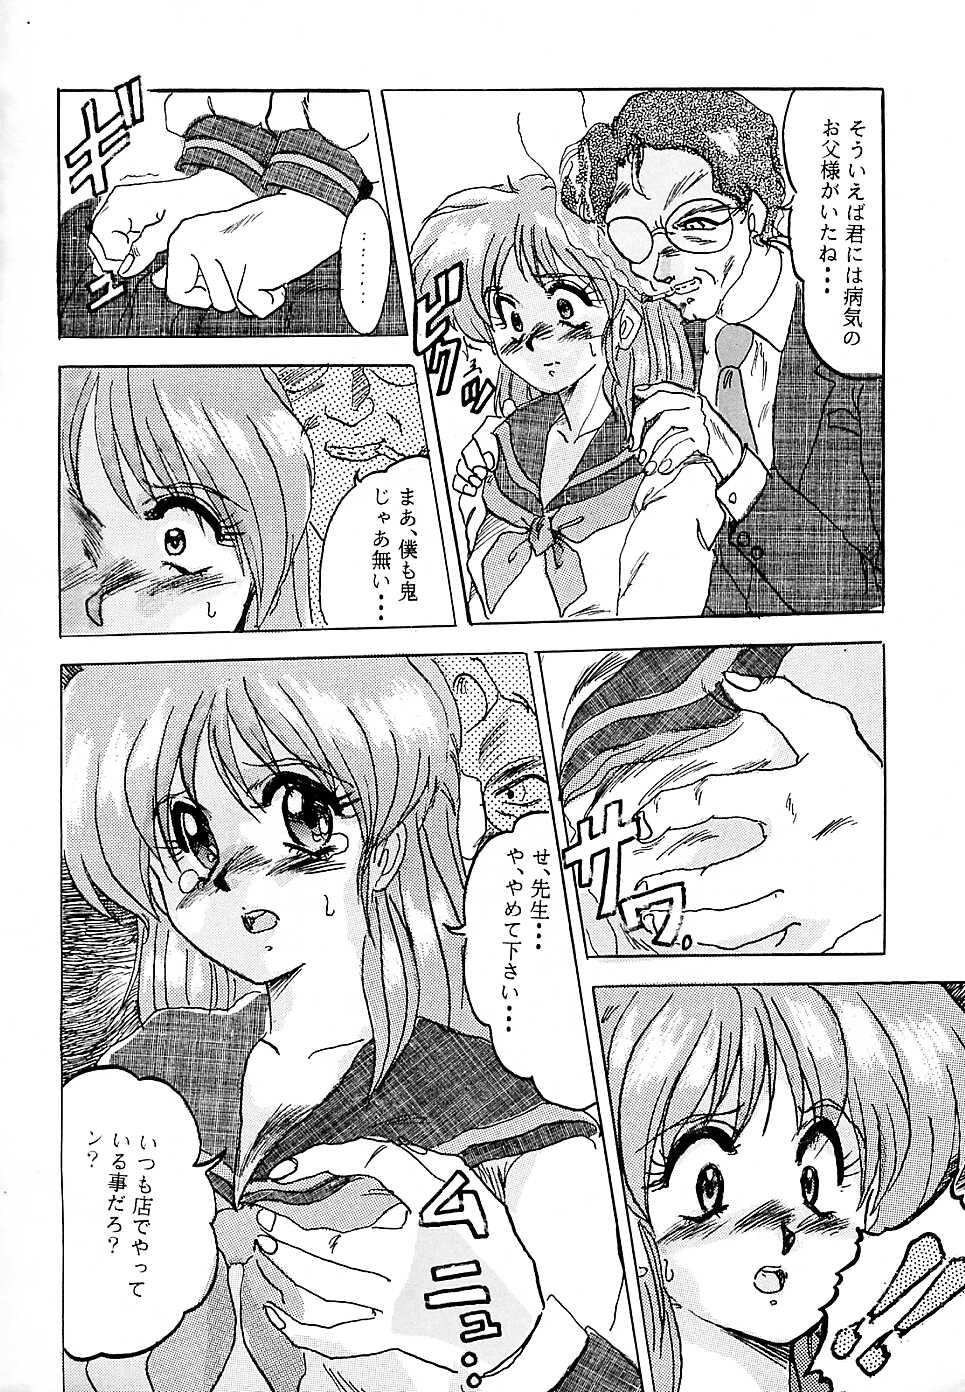 Anal Licking F 93C - Brave express might gaine No Condom - Page 5